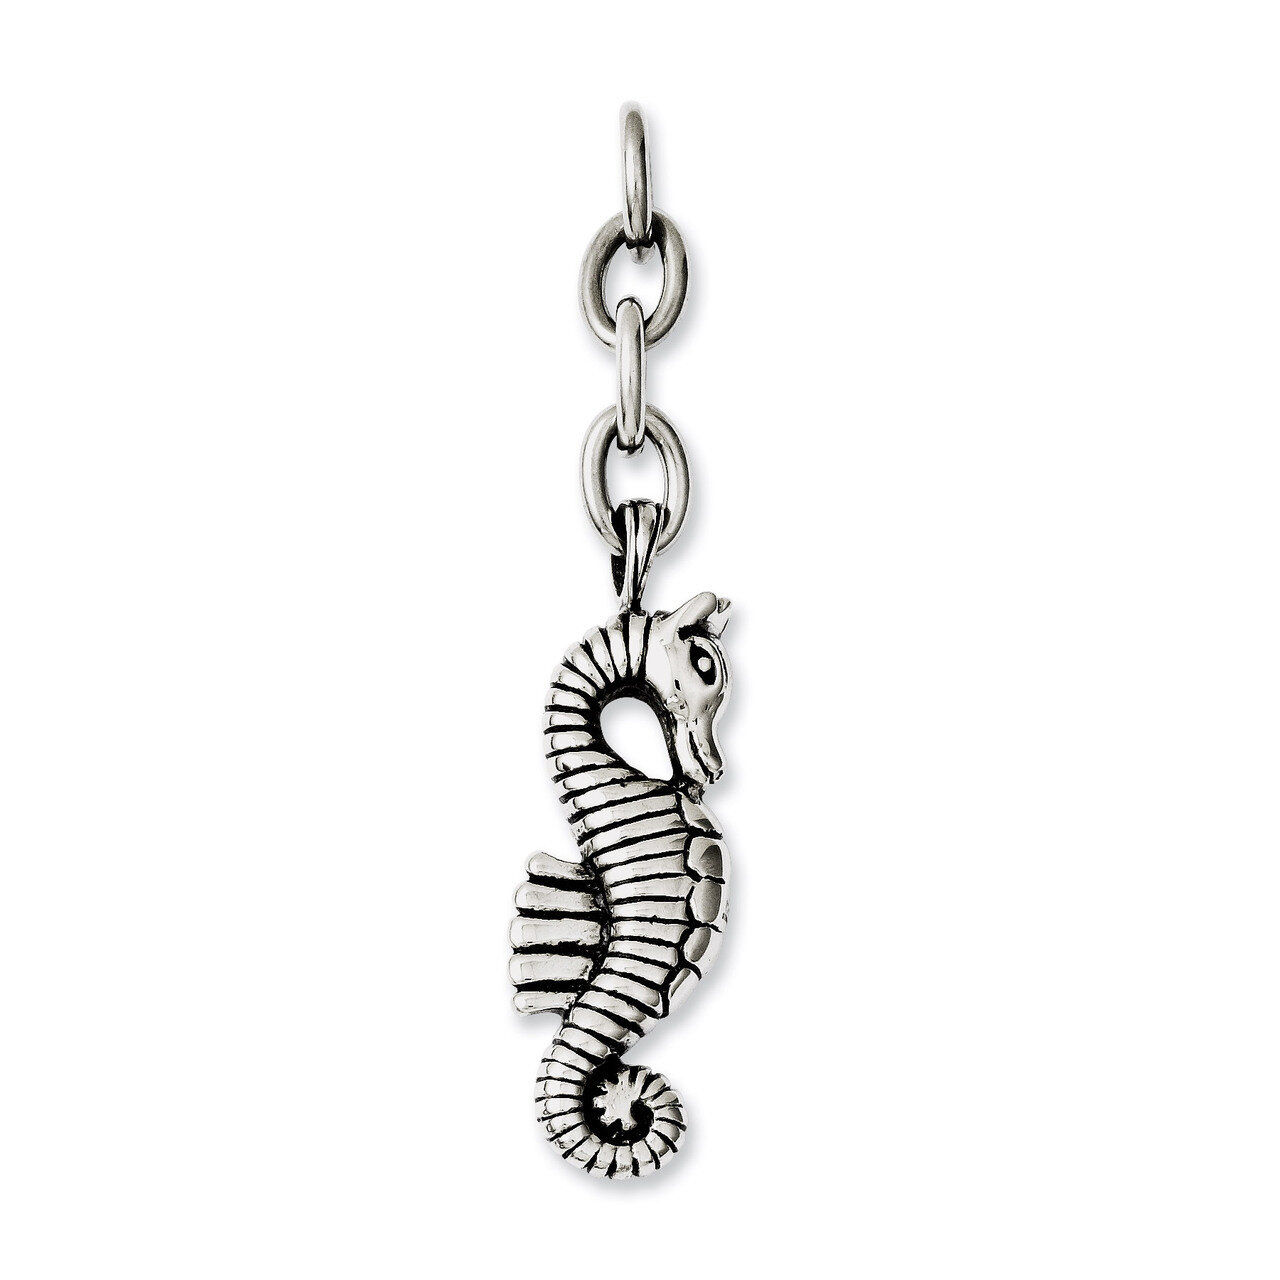 Seahorse Interchangeable Charm Pendant - Stainless Steel SRCH222